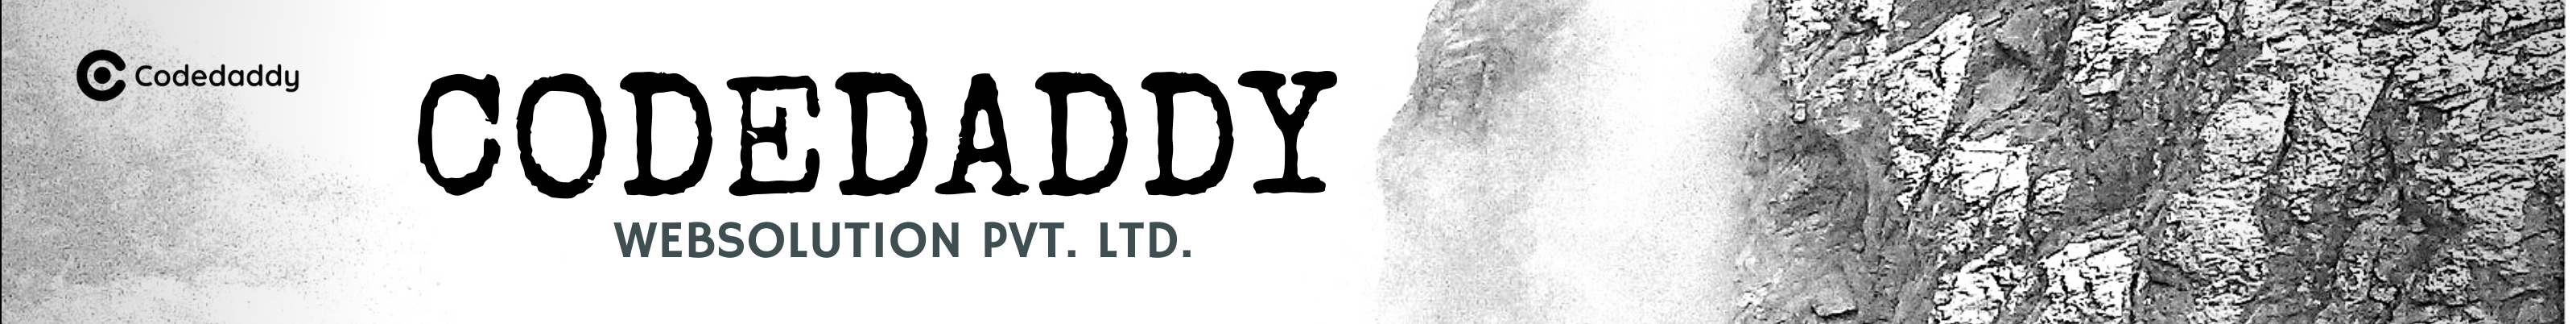 Code Daddy's profile banner